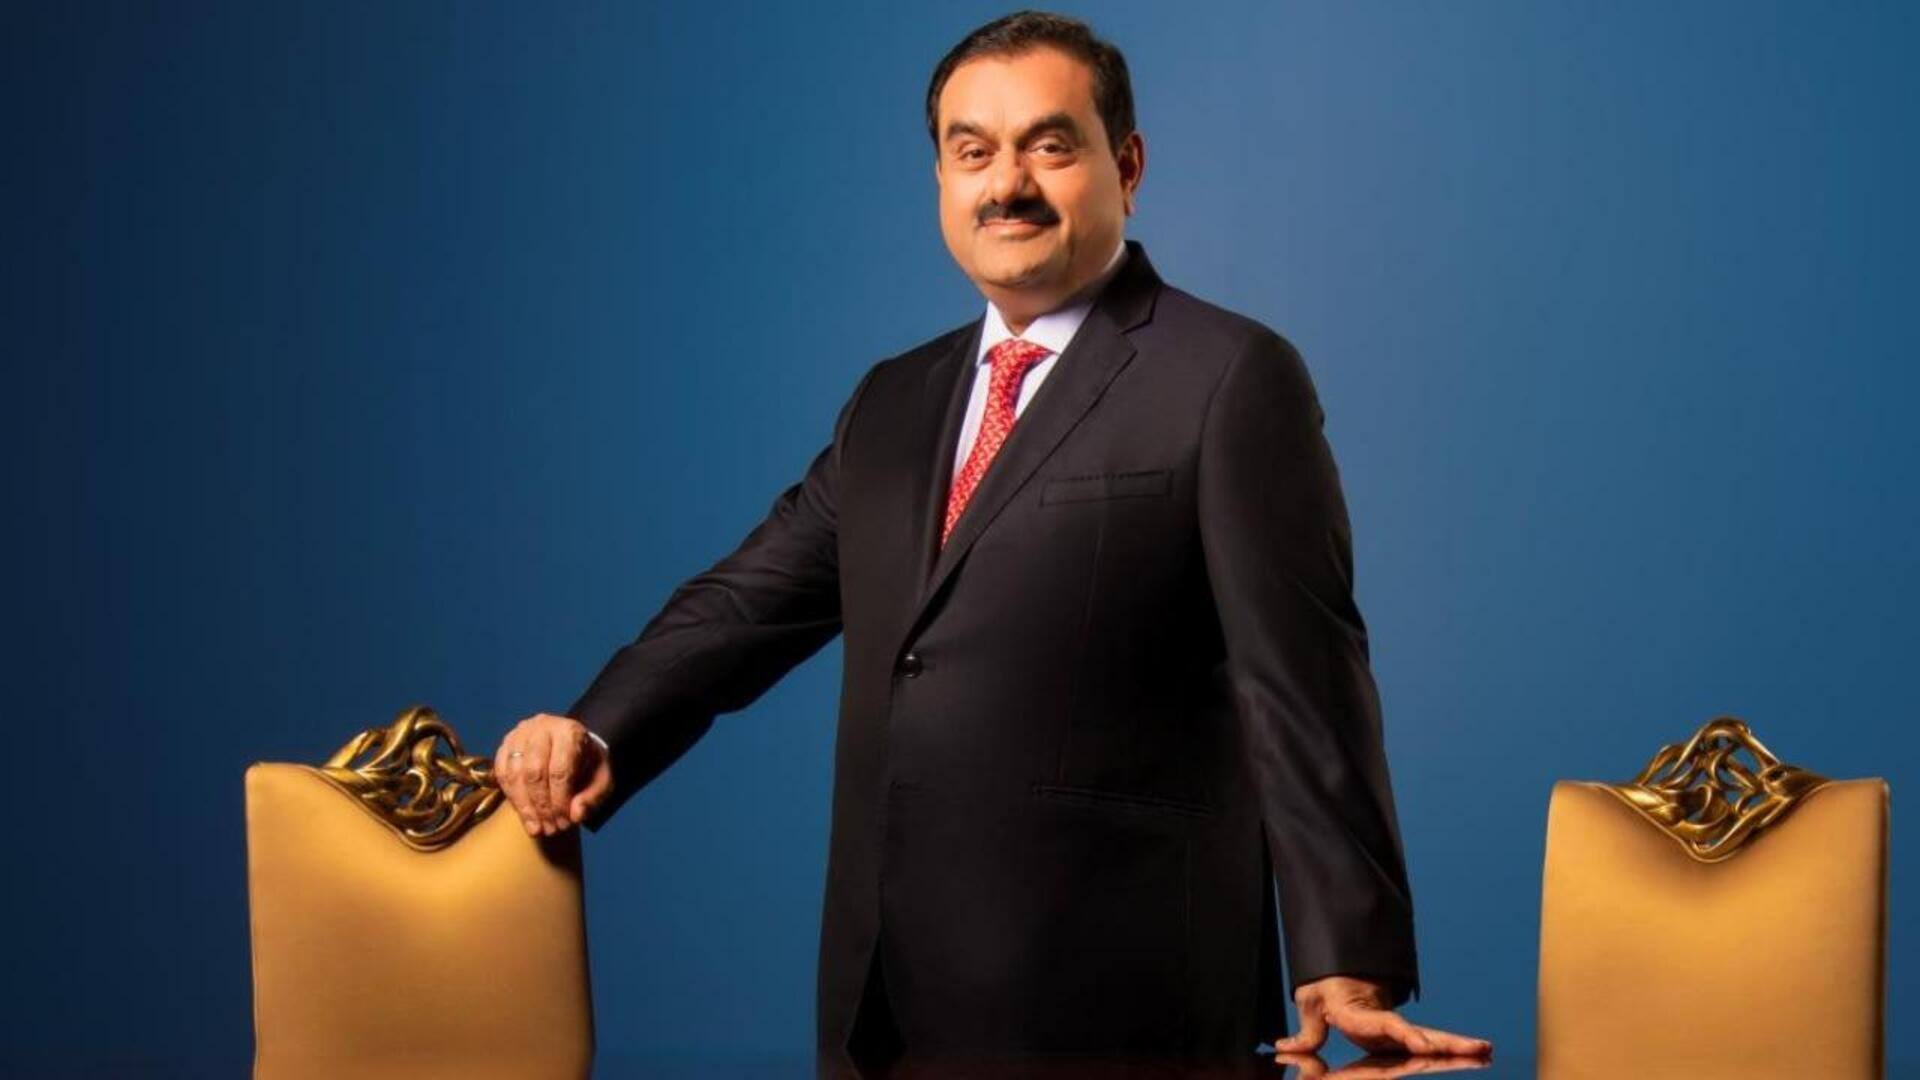 One year after Hindenburg row, Adani's fortune hits $100B again